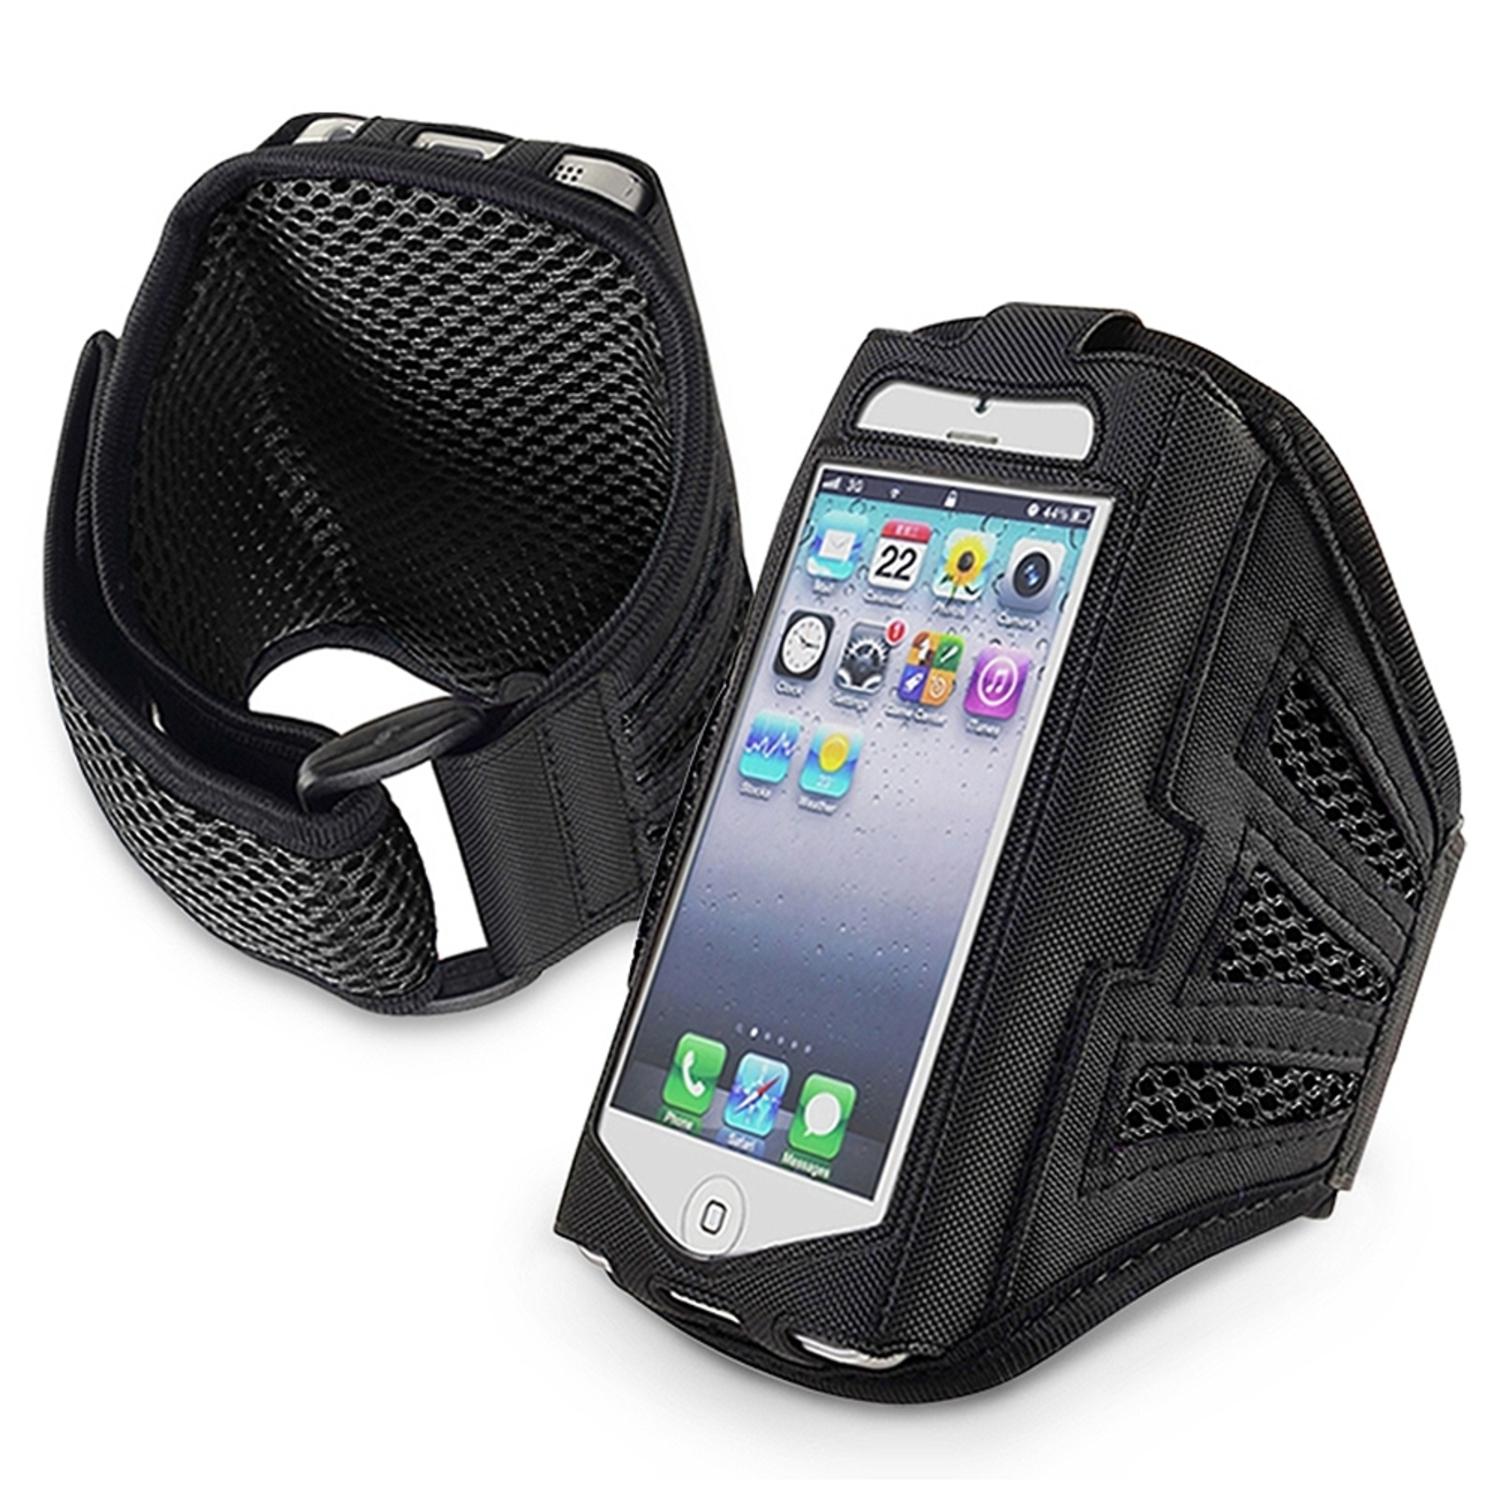 Insten Deluxe Armband for Sports Gym Running compatible with Apple iPhone 5 \/ 5C\/5S\/SE\/ touch 5th\/6th Generation, Black\/ Black